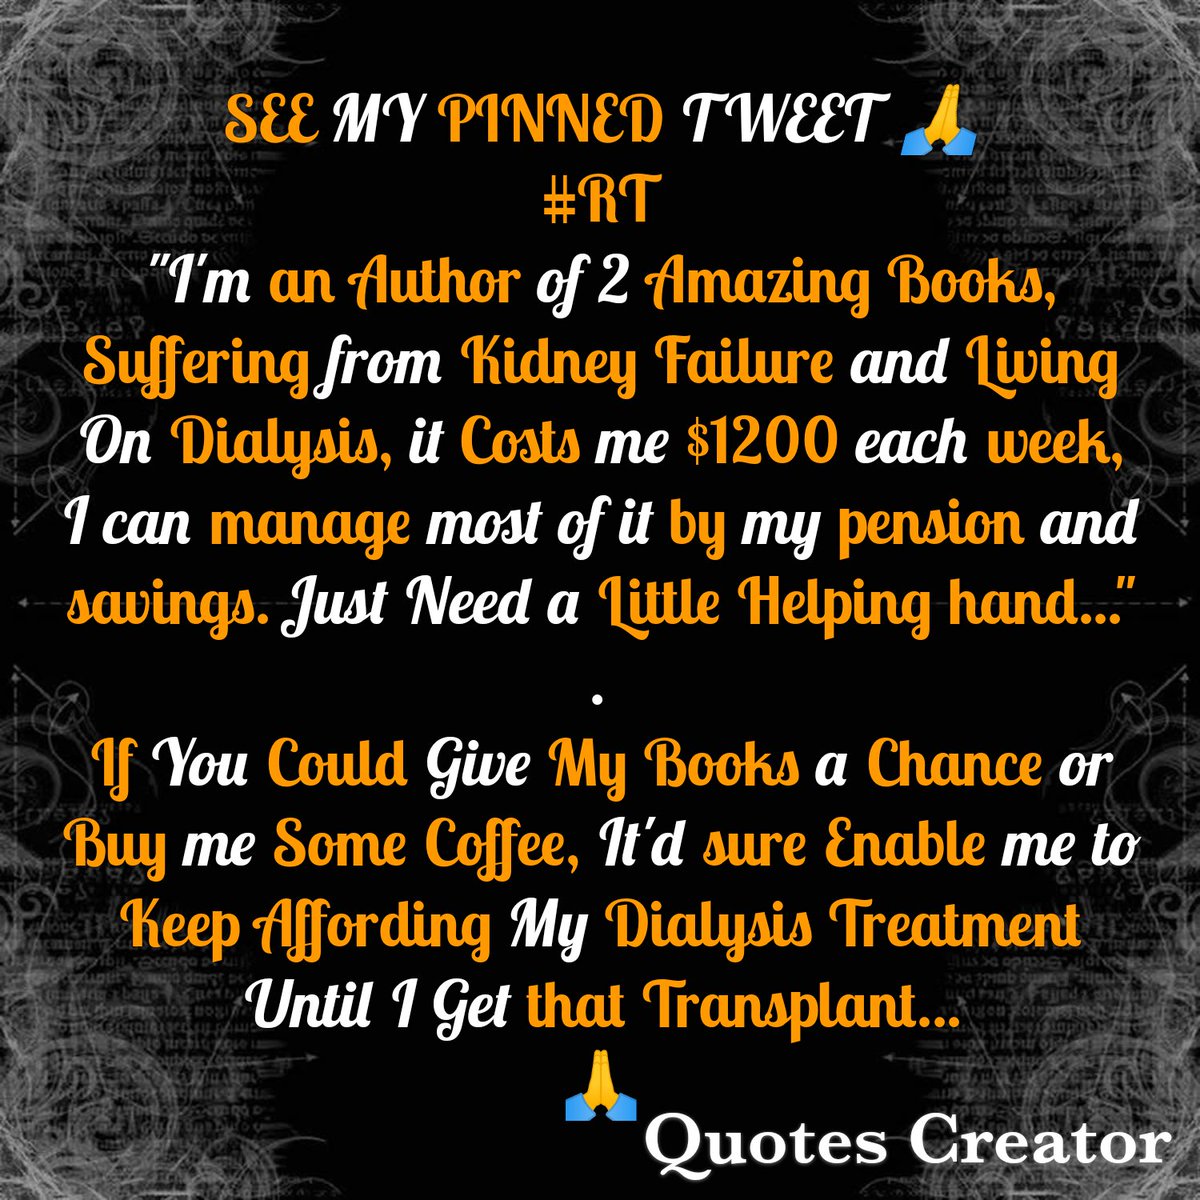 MY LIFE STORY 👇
salvagewrites.blogspot.com/2022/08/help-m…
TODAY'S TARGET=25 COFFEES☕
Buymeacoffee.com/helptristian ☕
OR
HELP ME SELL 5 COPIES TODAY📚
amazon.com/stores/W.-Salv…
Thanks 🙏
Nevfidokske
@Zuhleika1
@lord_froth
@Michael_Naether
@Intheprezent
@GrandmaRanger
@VilleNiittynen
@allozhilr…